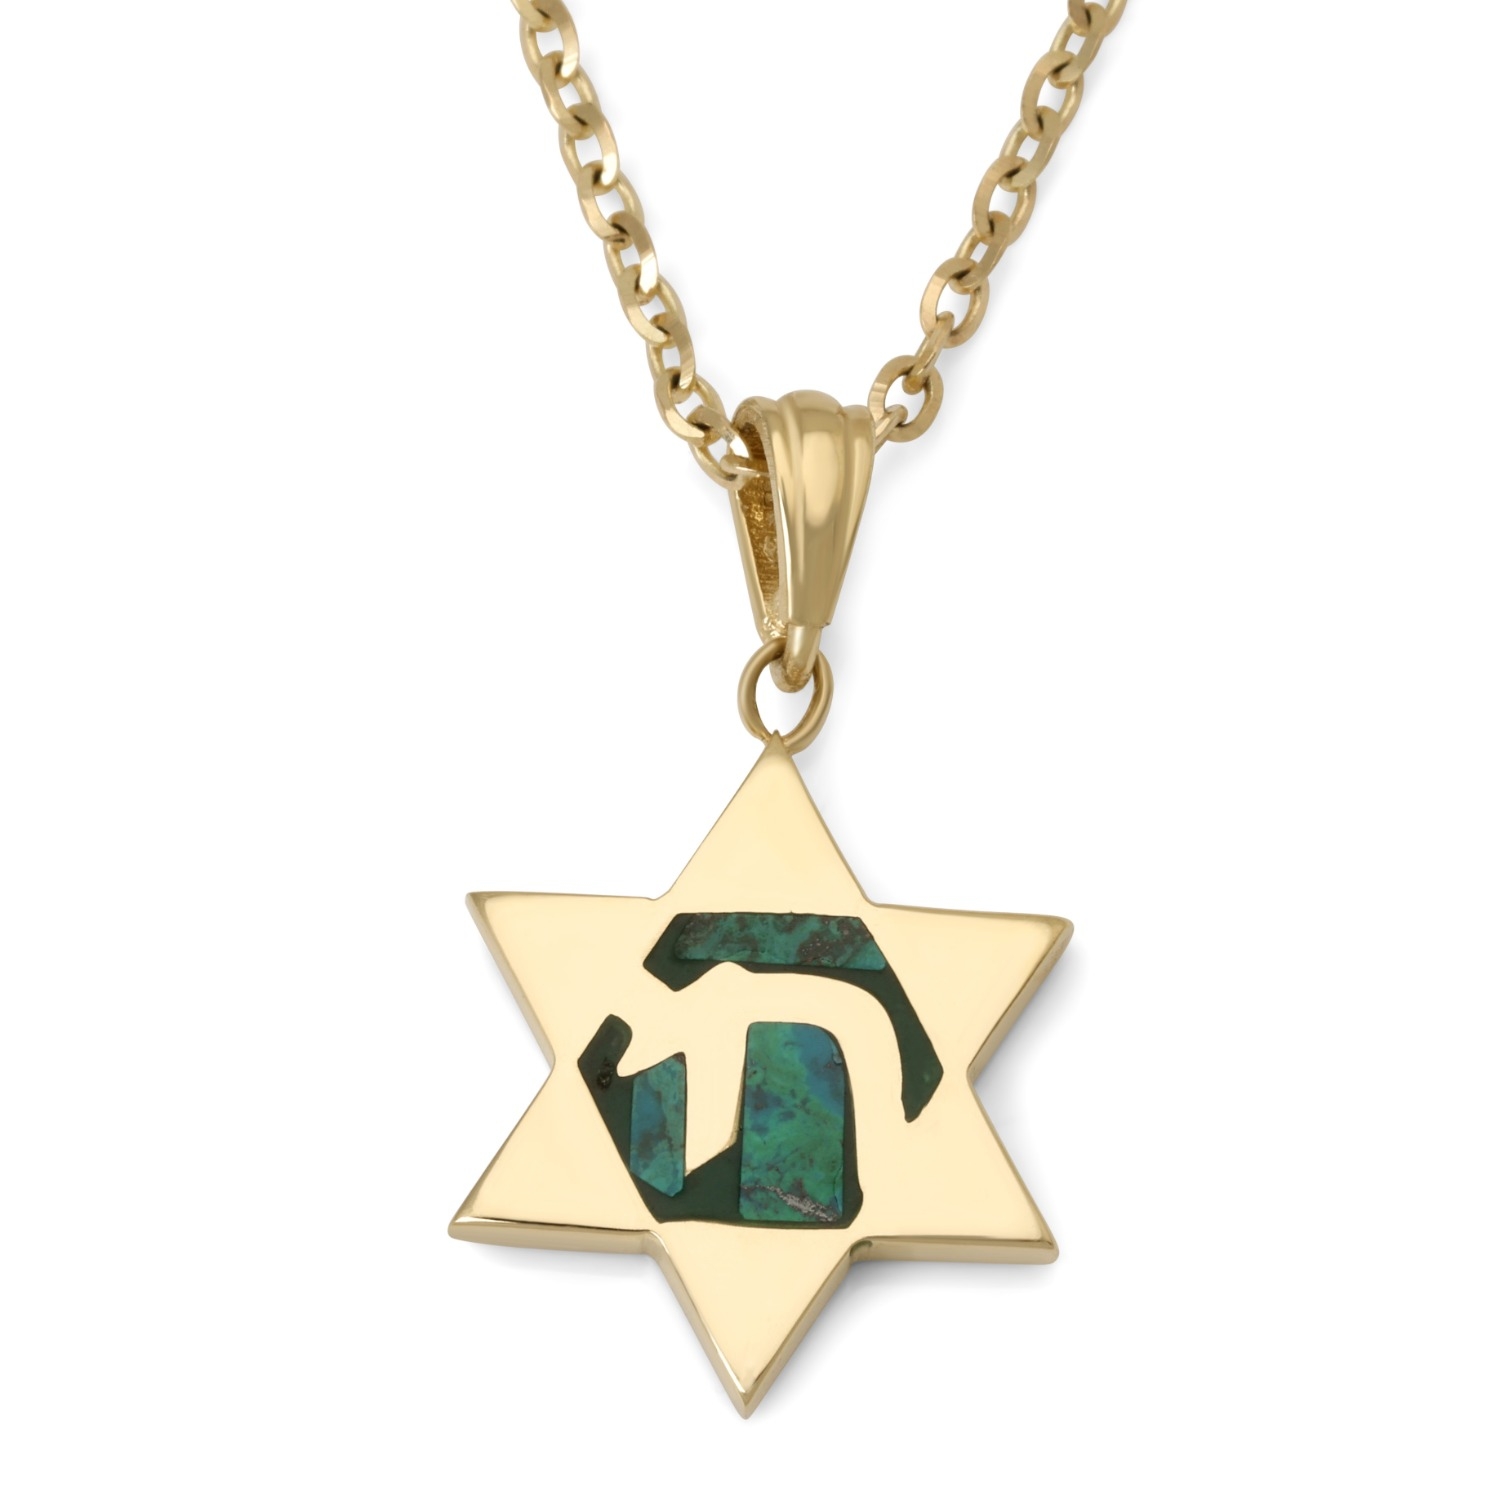 14K Gold Star of David with Chai on Eilat Stone Pendant Necklace - 1